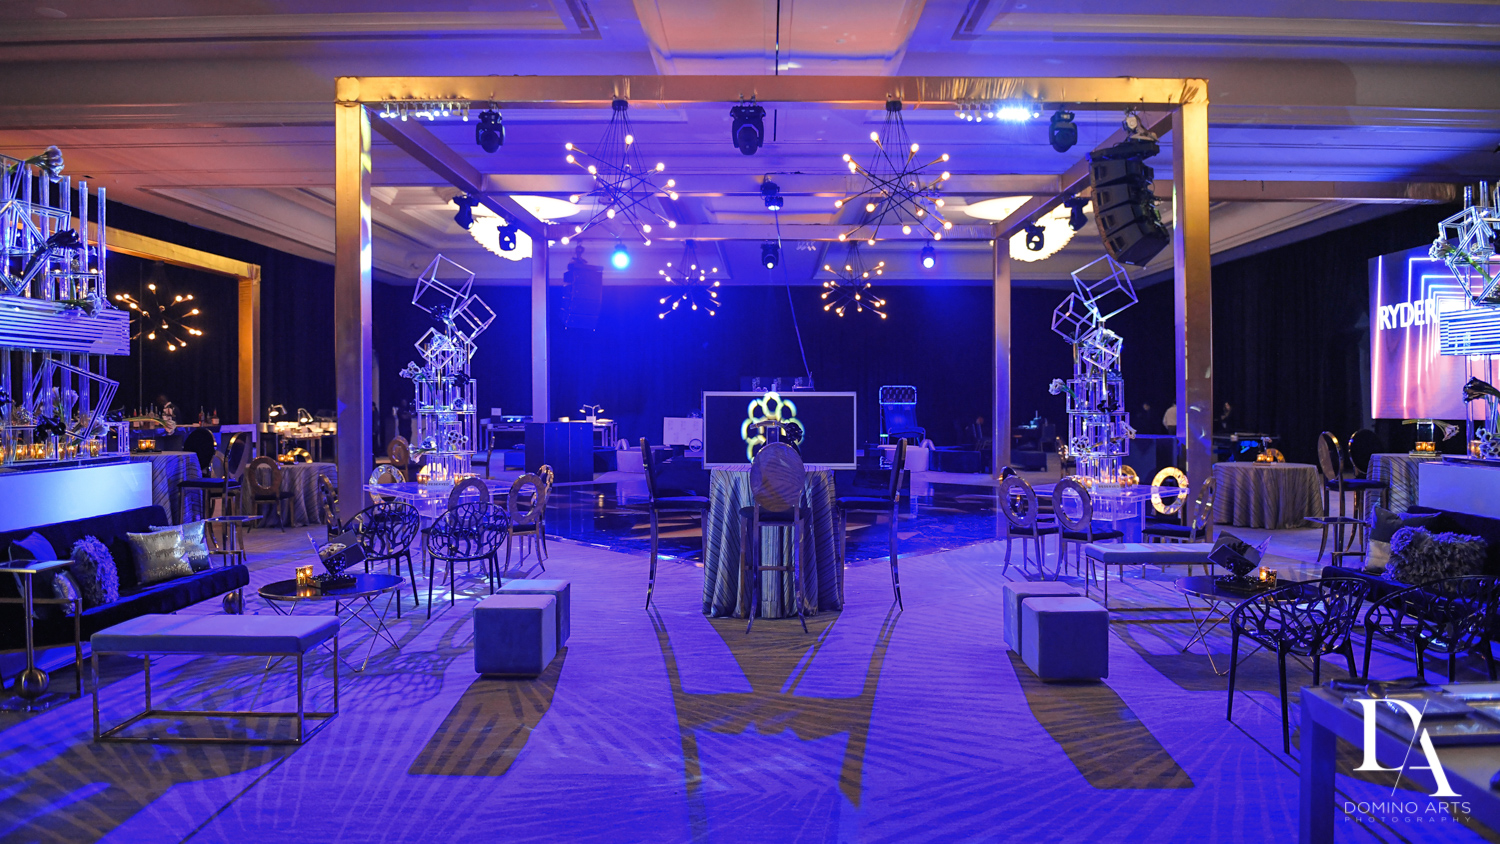 modern blue decor at Designer invitations at Stylish Architectural B'Nai Mitzvah at the NEW JW Marriott Miami Turnberry Resort & Spa by Domino Arts Photography